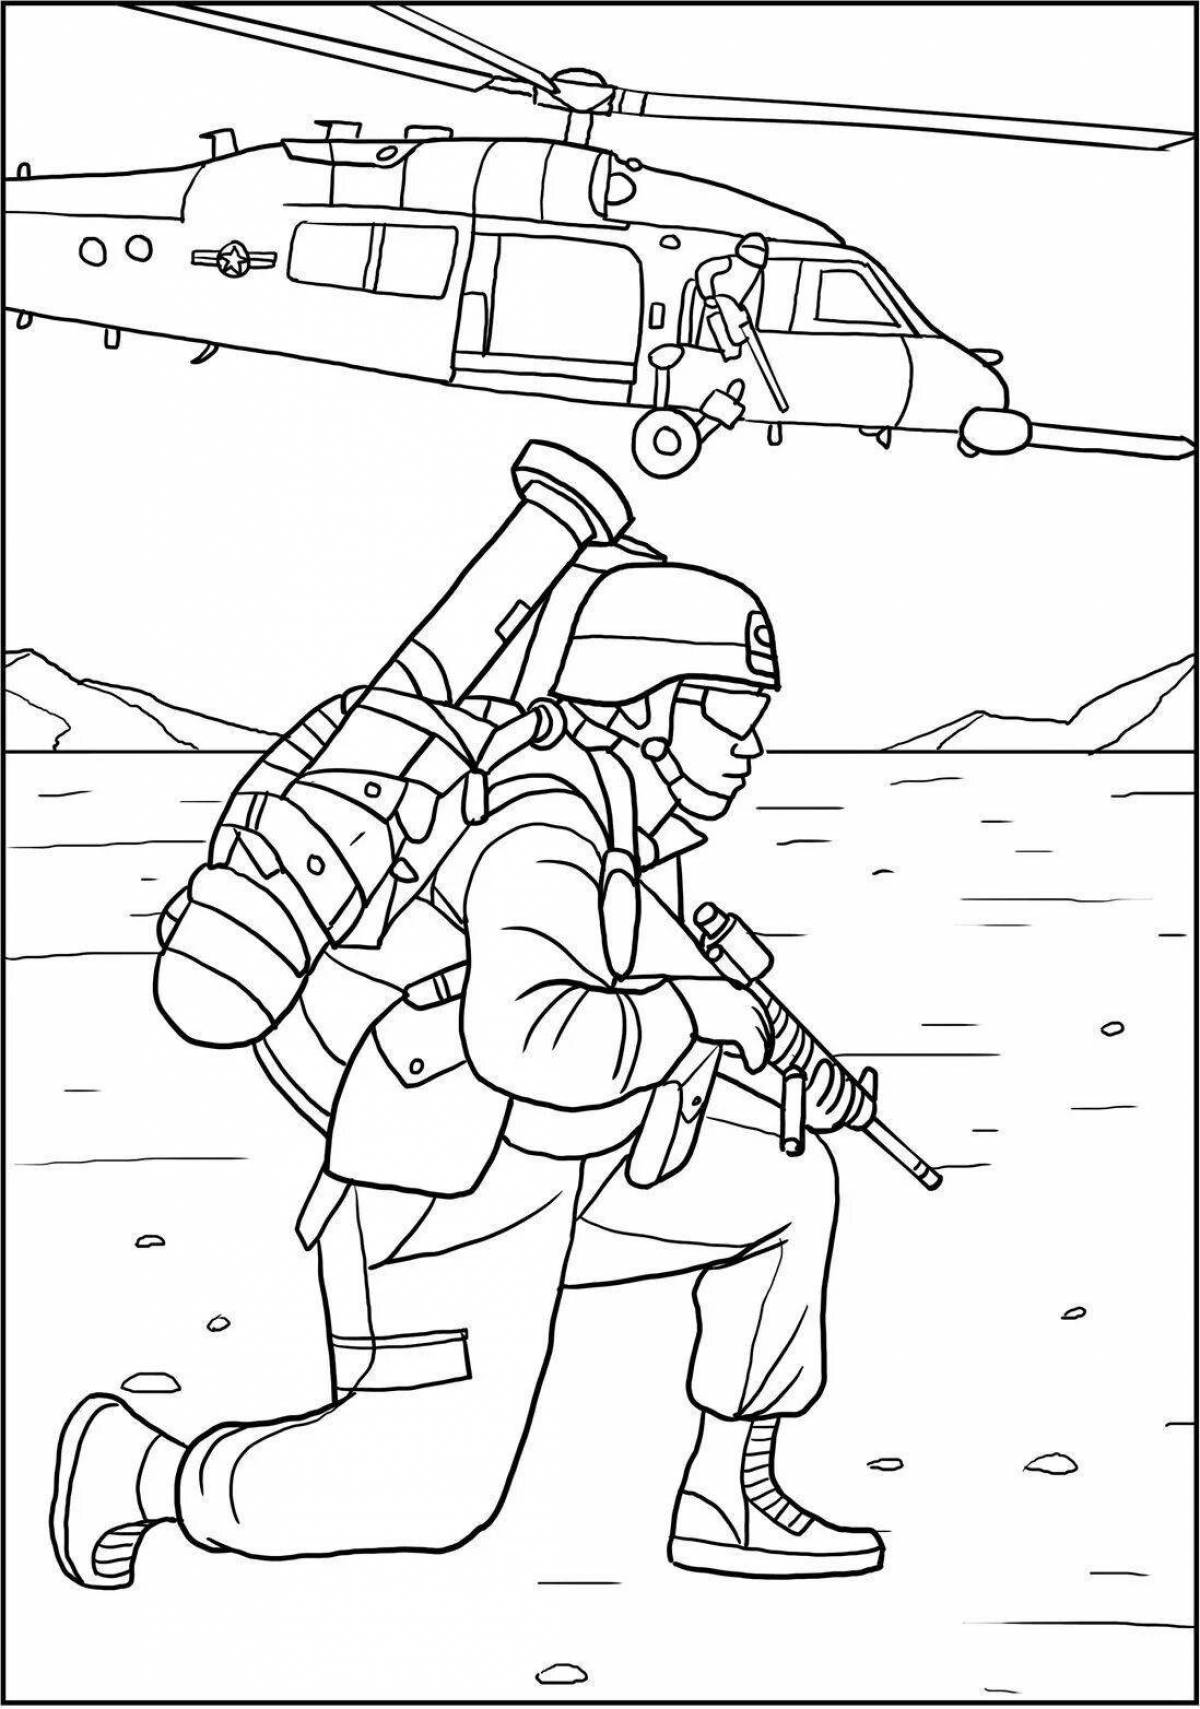 Funny army coloring book